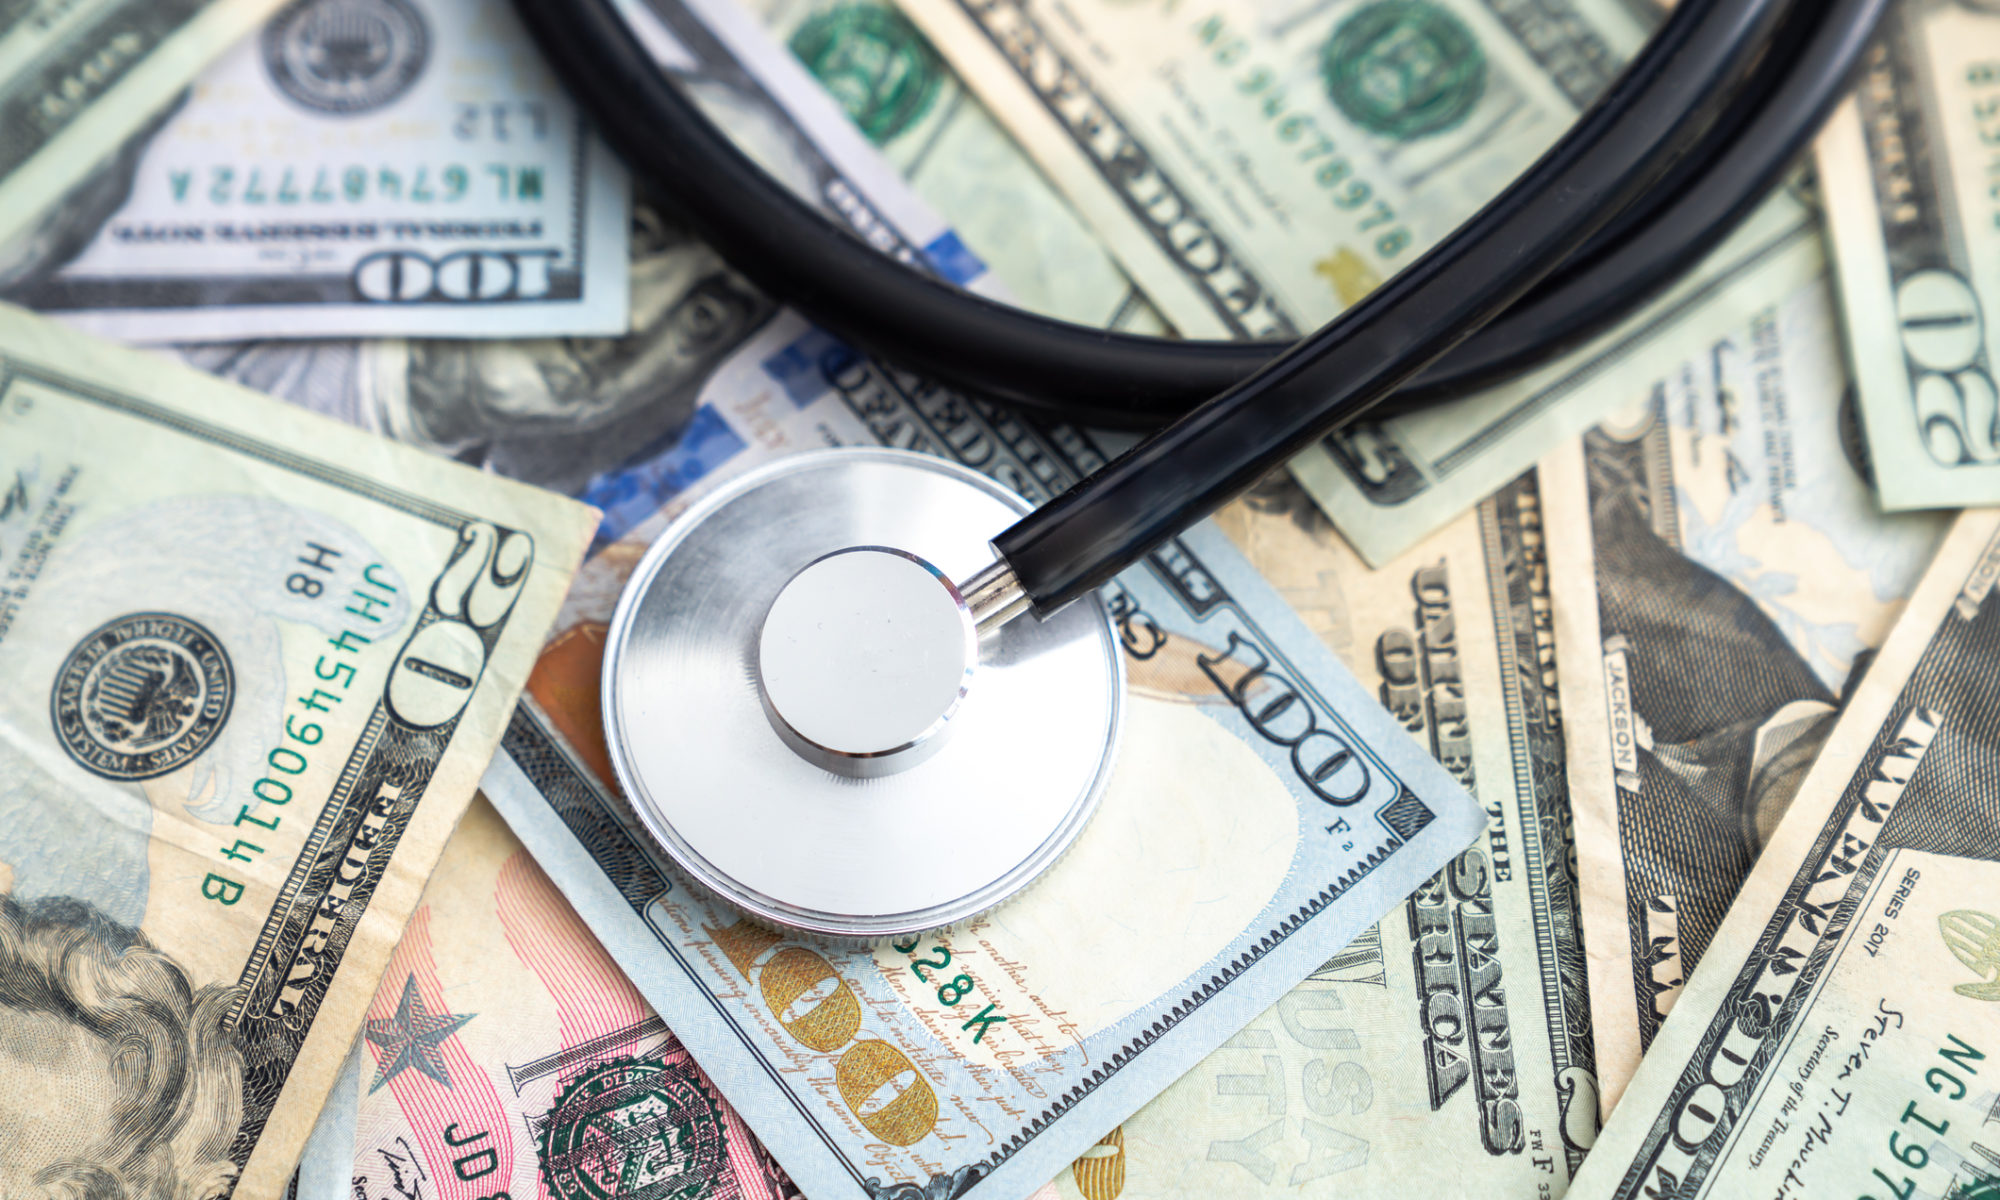 A stethoscope on a pile of money illustrates that rules around healthcare price transparency are meant to keep costs down